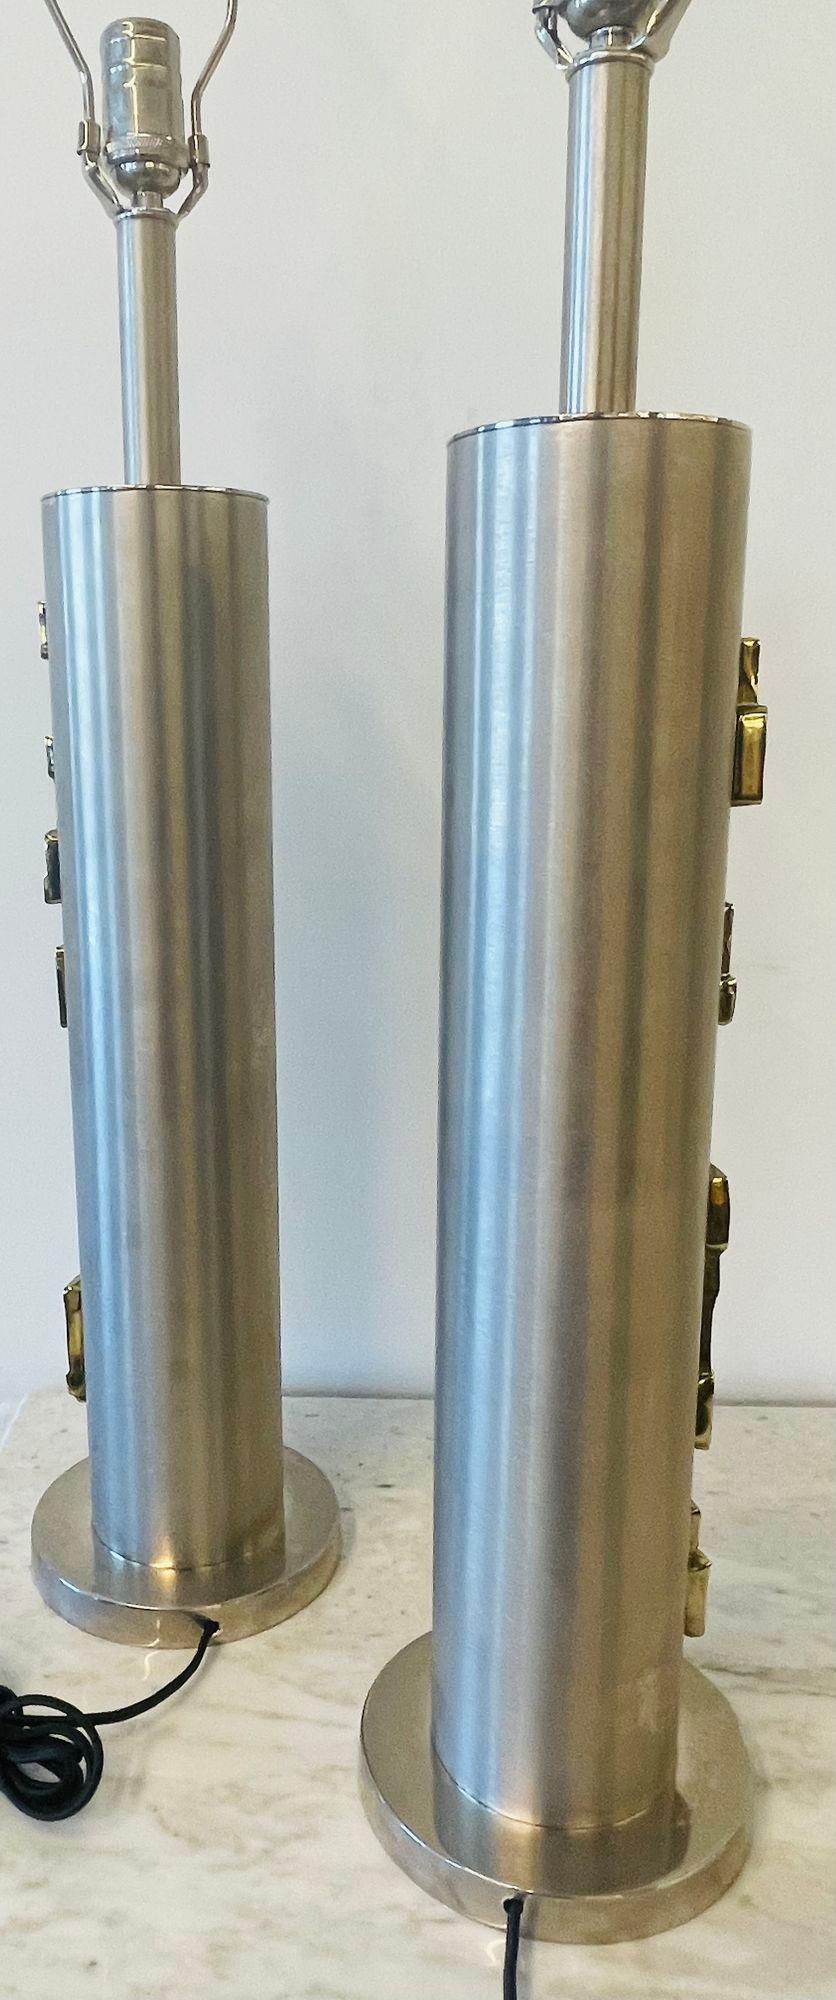 Pair of Modernist Table Lamps, Brushed Nickel and Sculptural Metal, 1970s For Sale 3